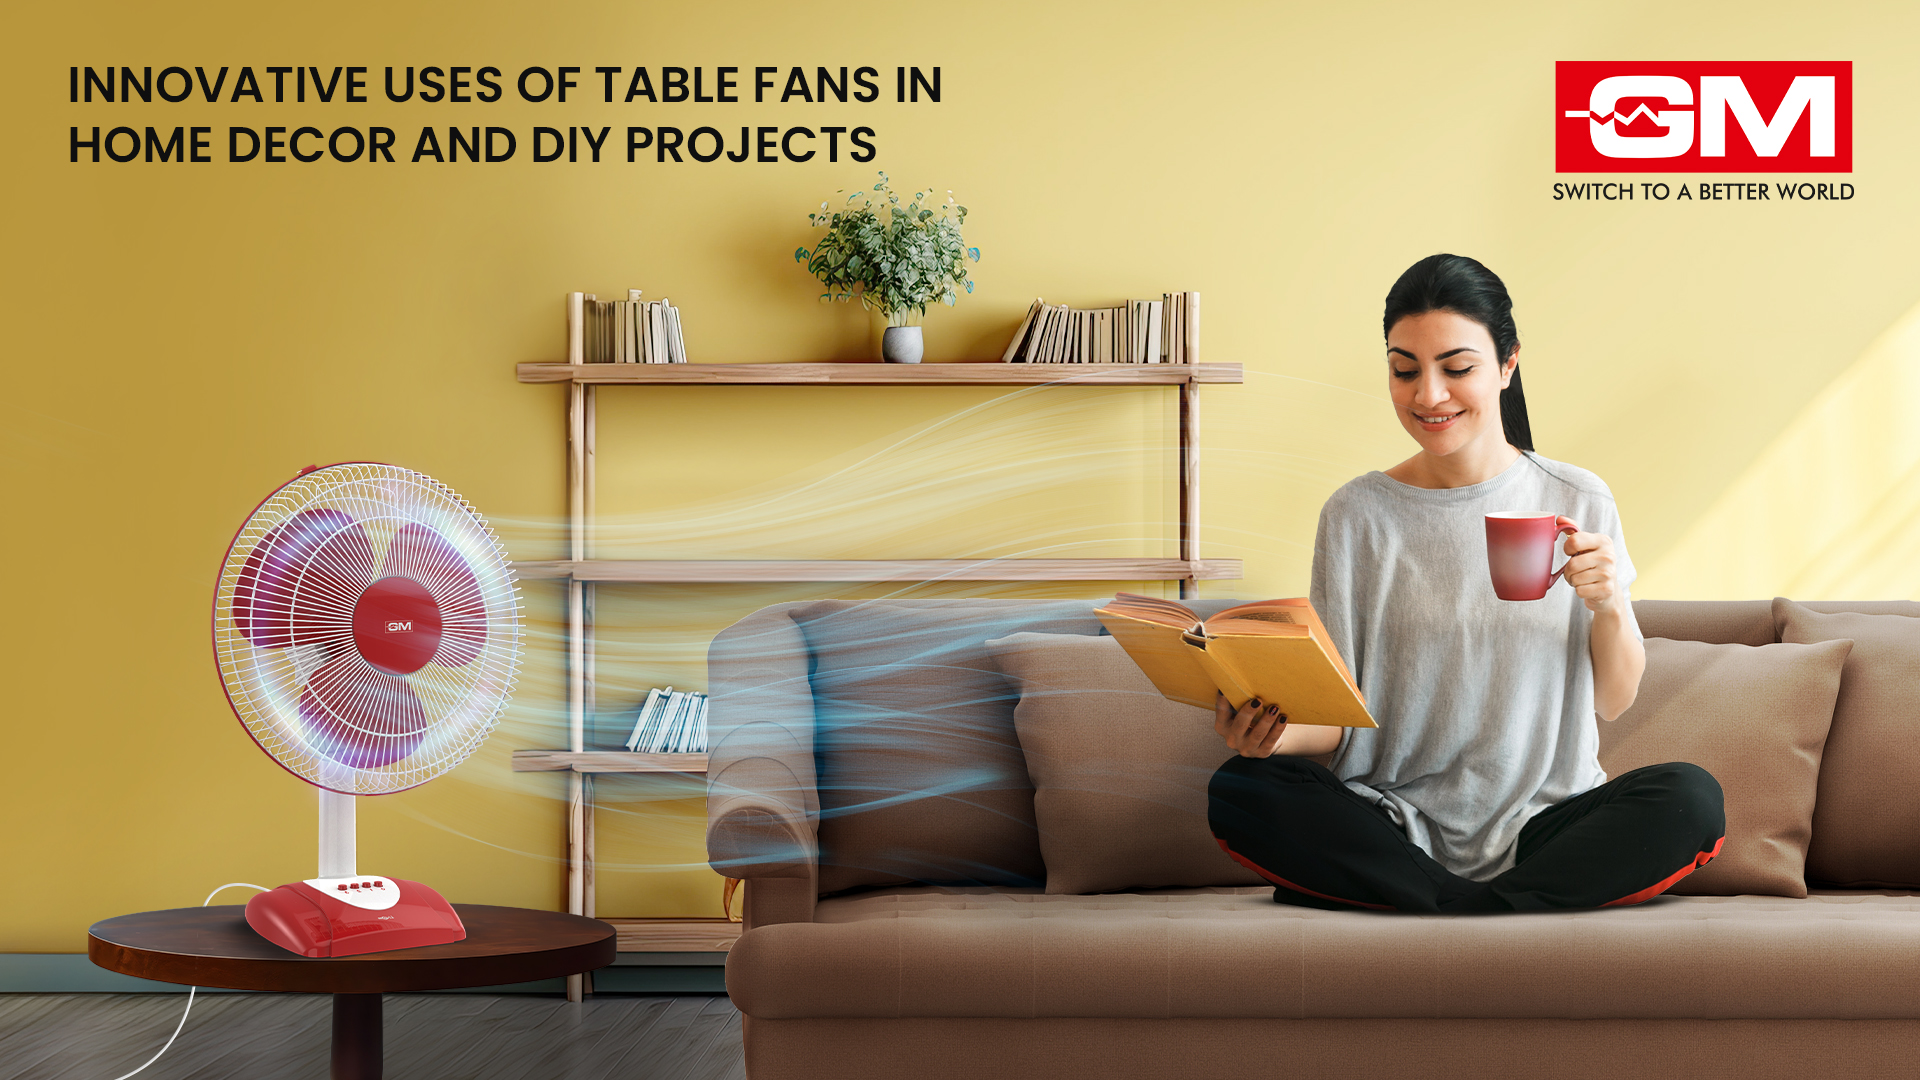 Innovative Uses of Table Fans in Home Decor